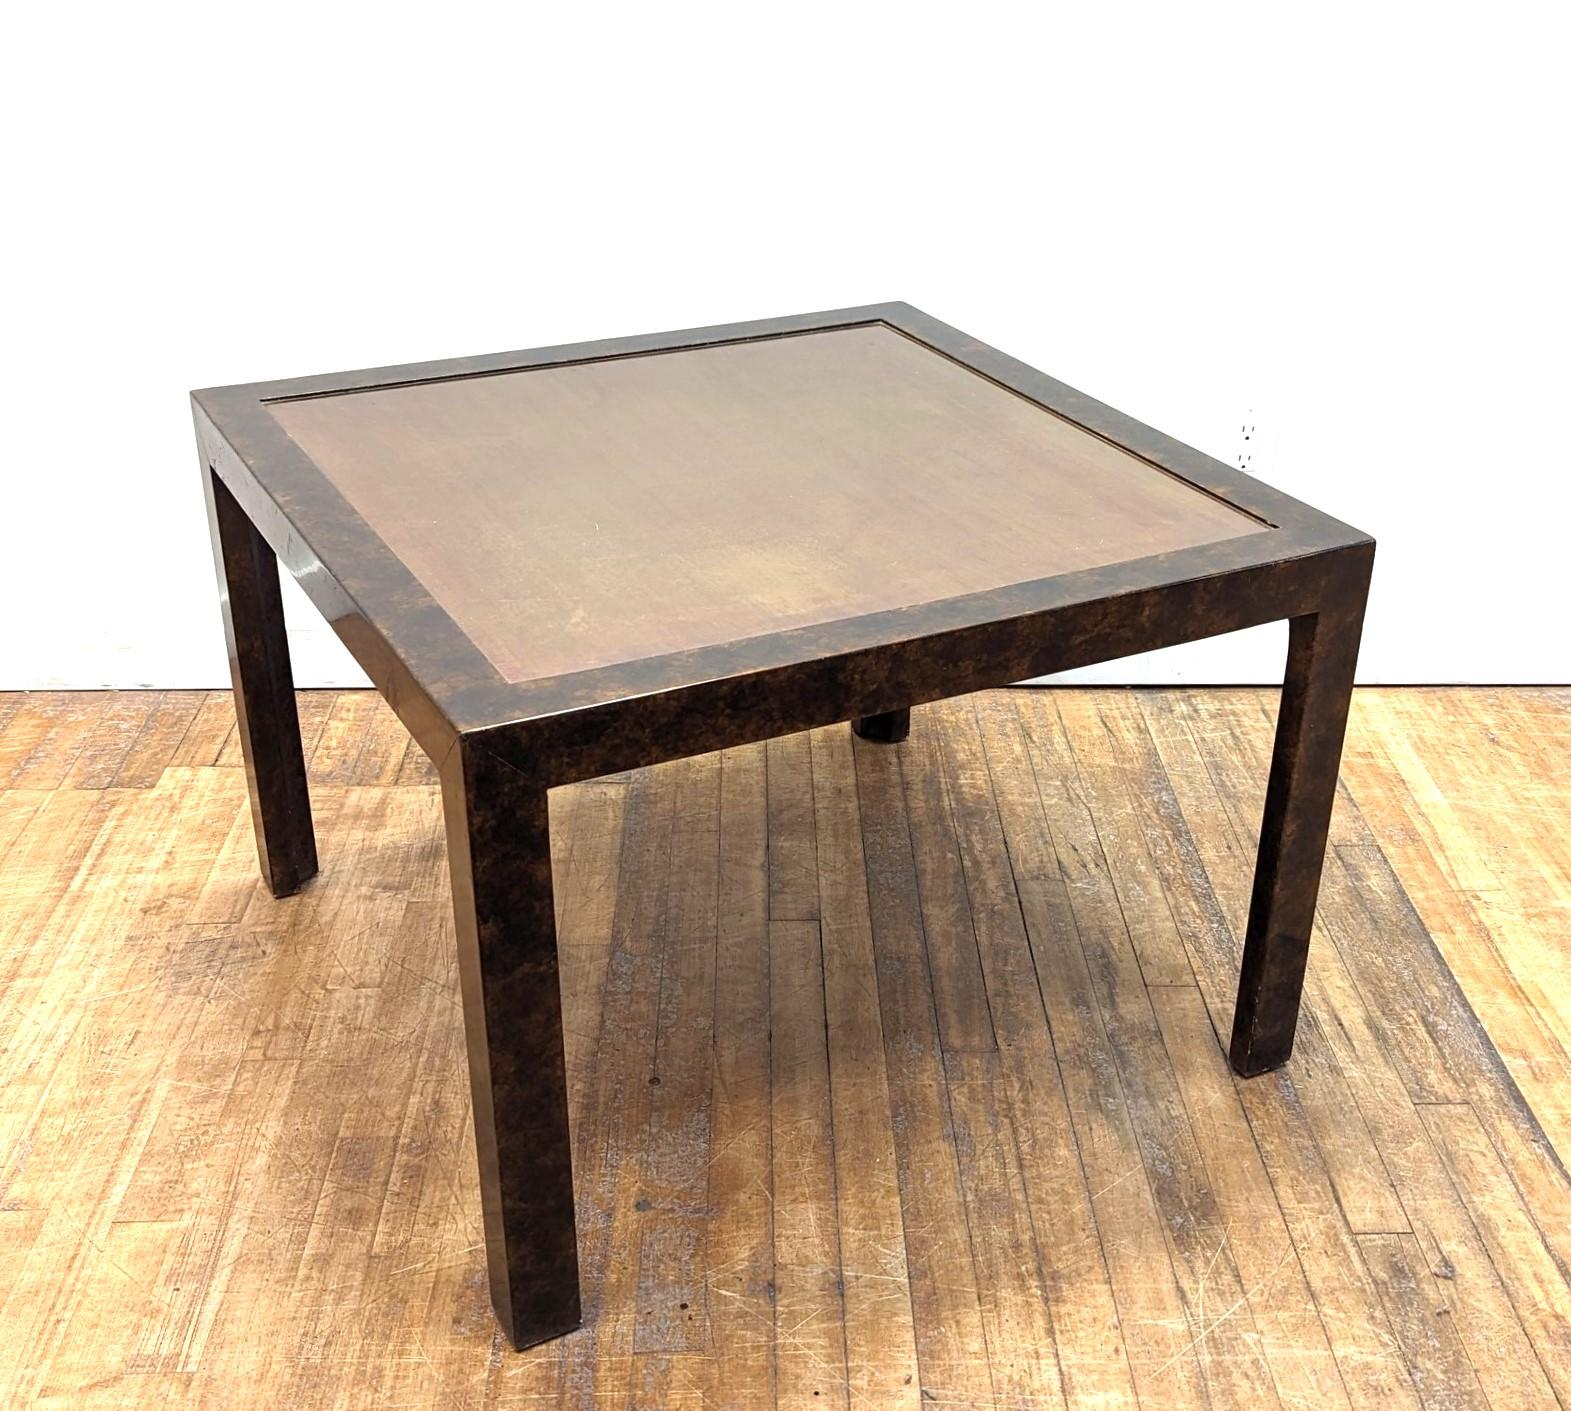 Unique & Rare John Widdicomb Faux Bronzed with Brass Patinaed Console Side End Table. 
A Table Faux Bronzed frame with Brass Patinaed inset top. Simple elegant parsons style table with simulated faux bronzed spotting metal effect similar to